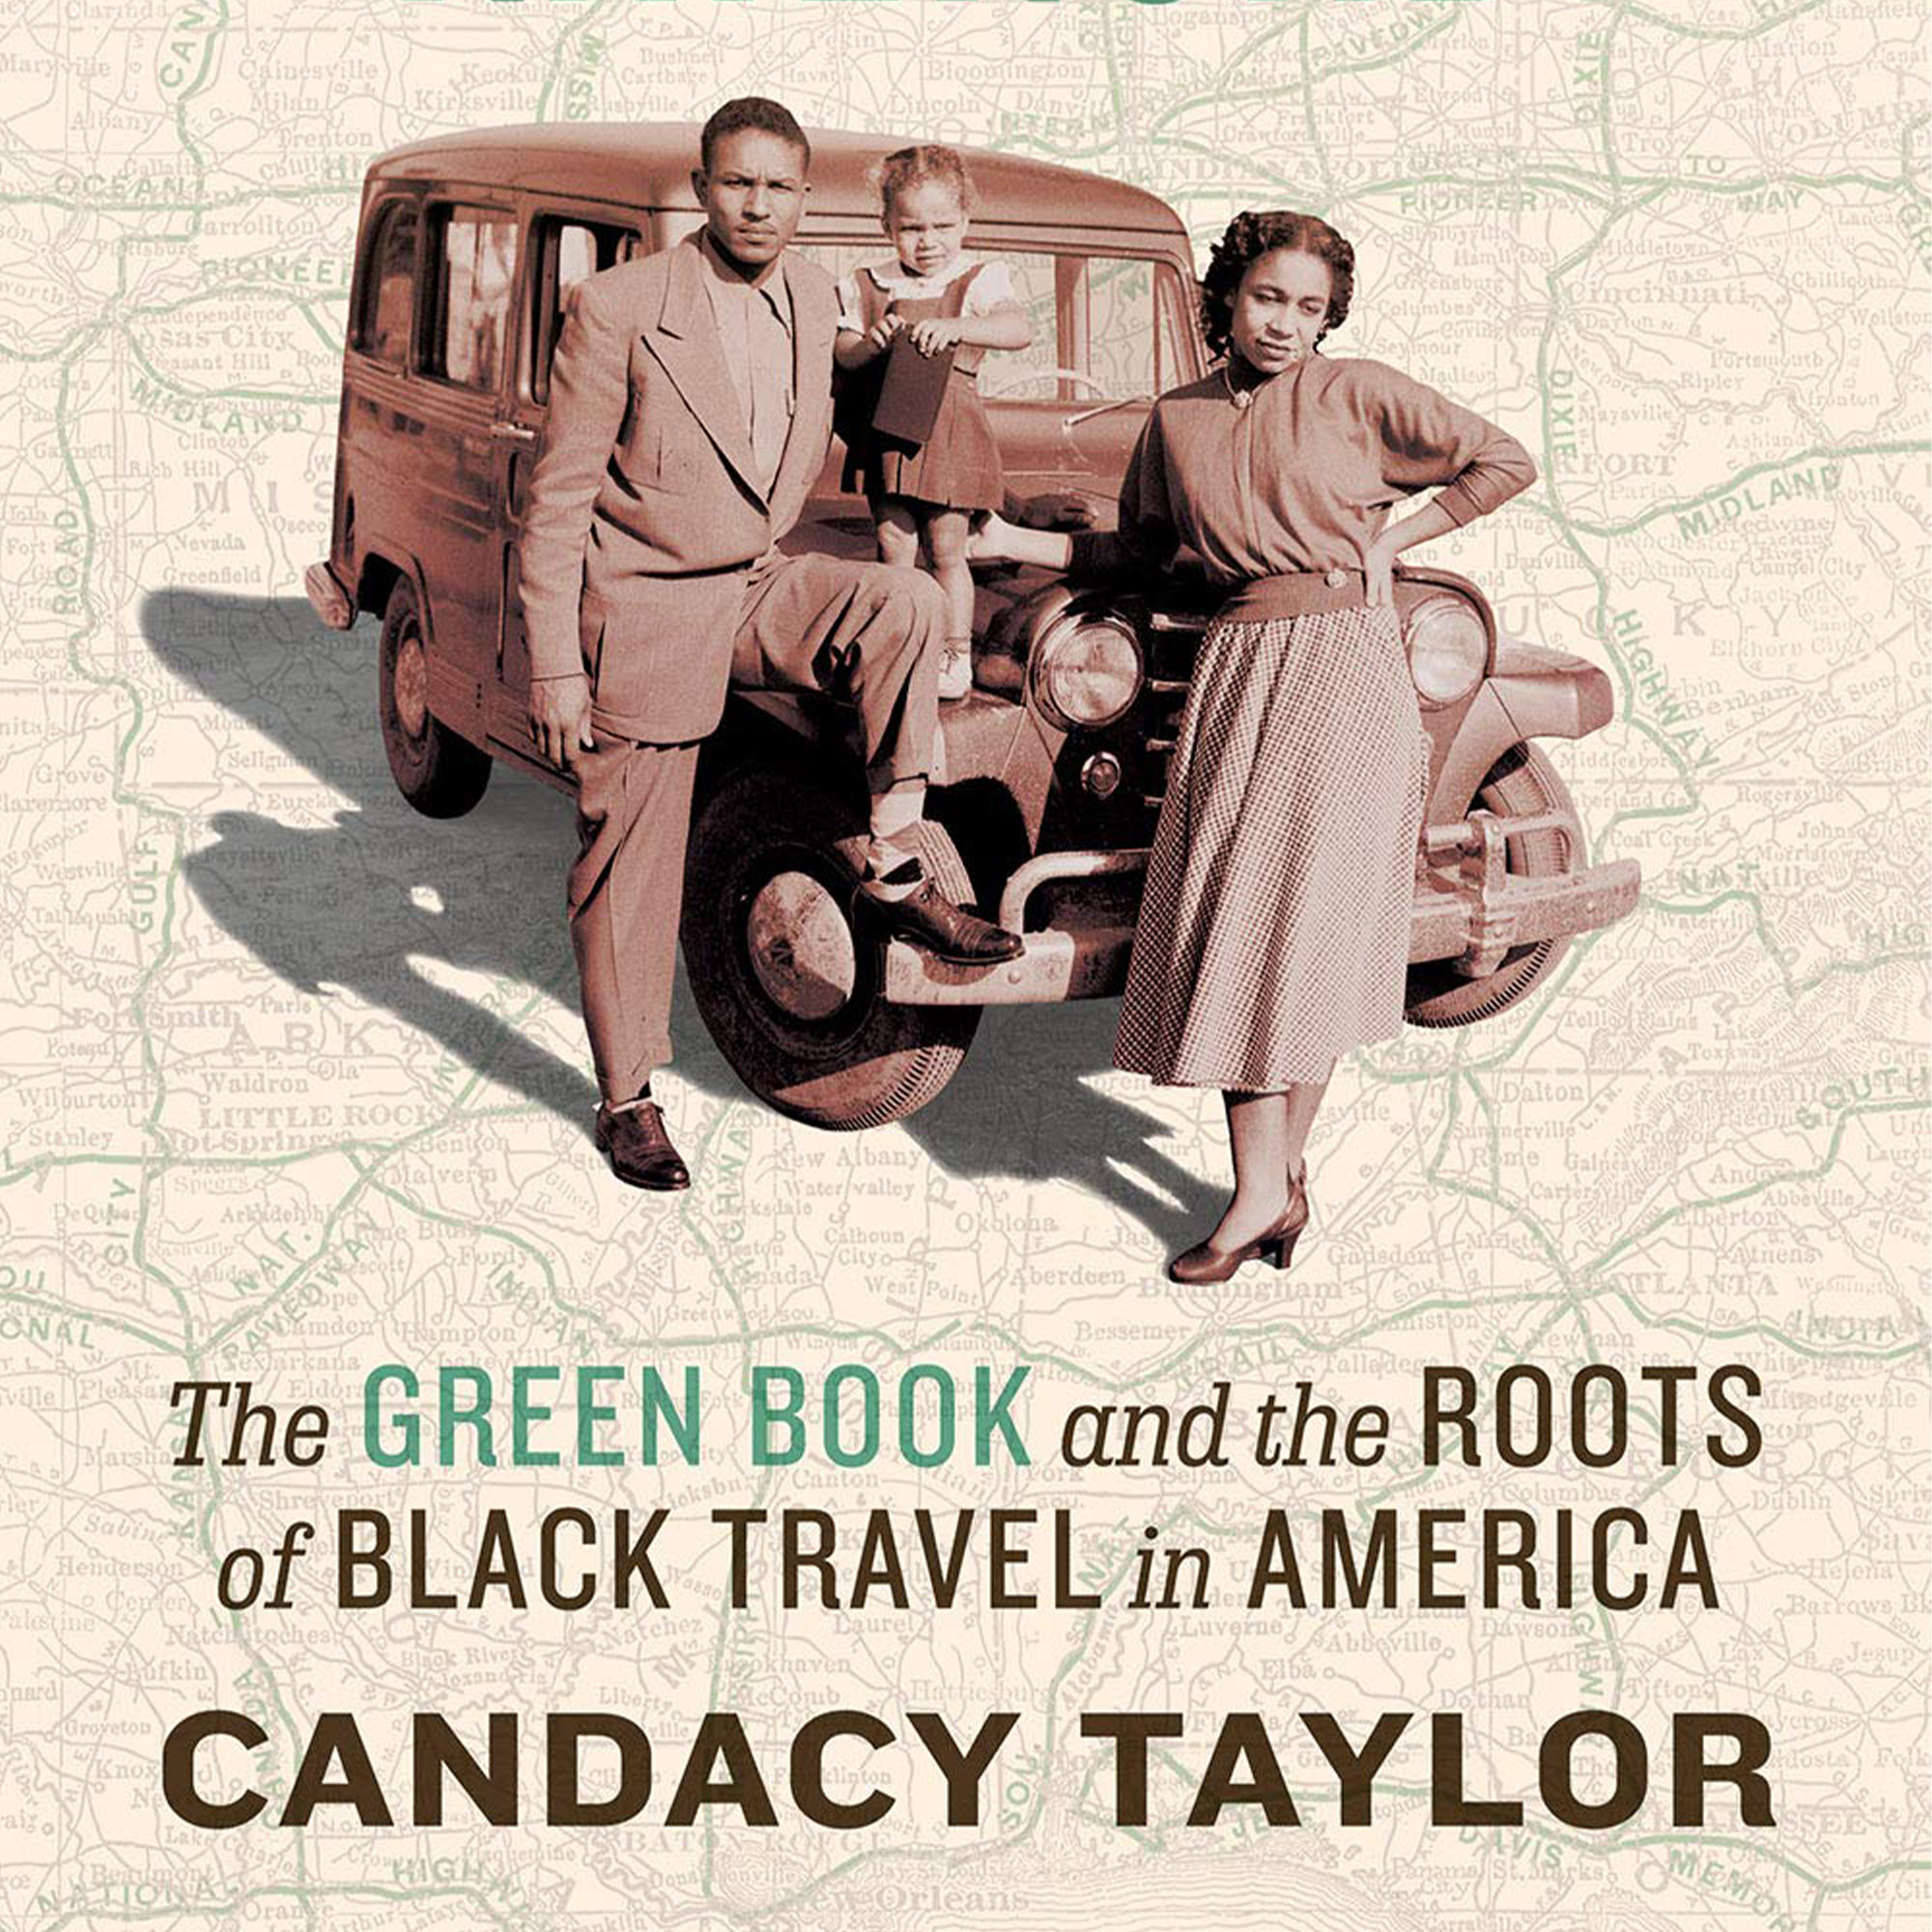 Overground Railroad_The Green Book and the Roots of Black Travel in America with Candacy Taylor